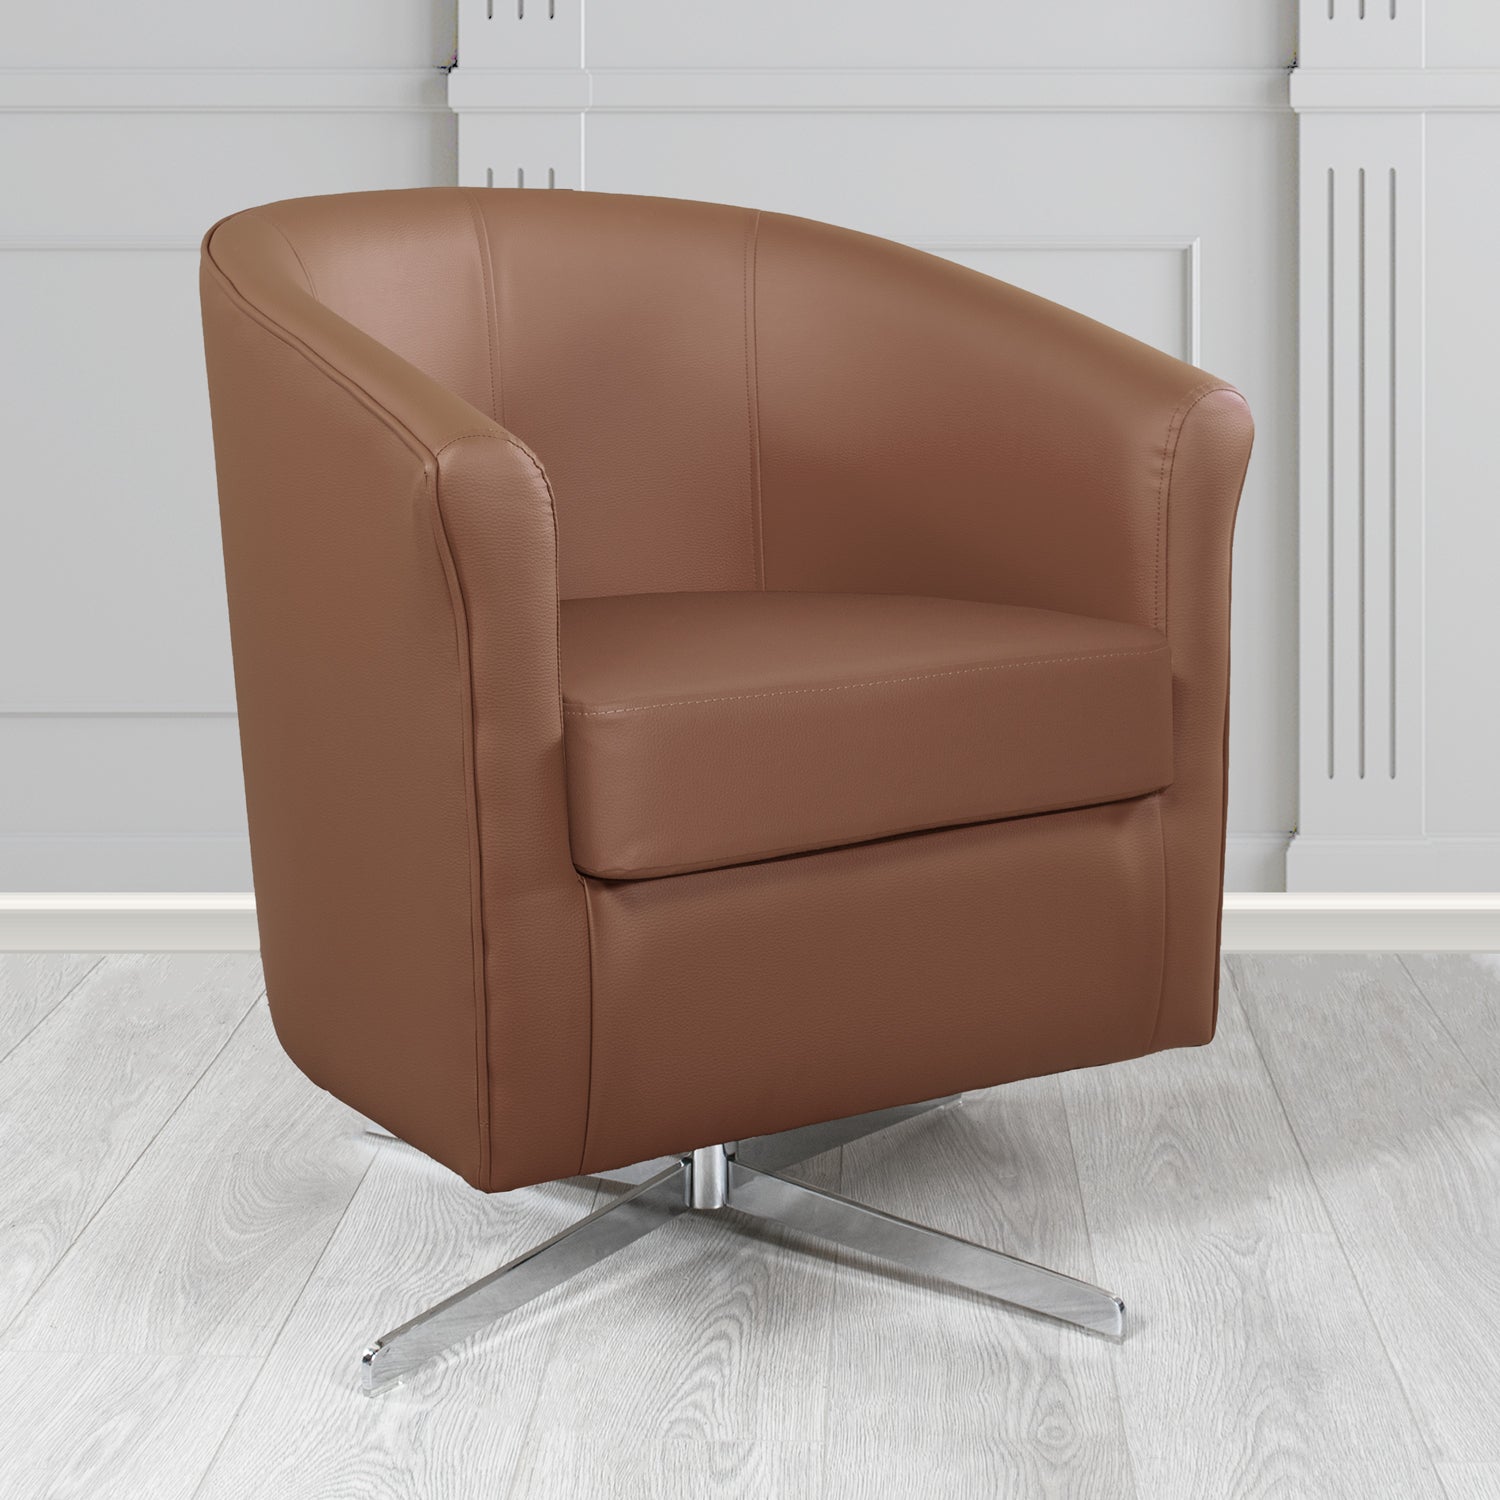 Cannes Swivel Tub Chair in Just Colour Walnut Crib 5 Faux Leather - The Tub Chair Shop